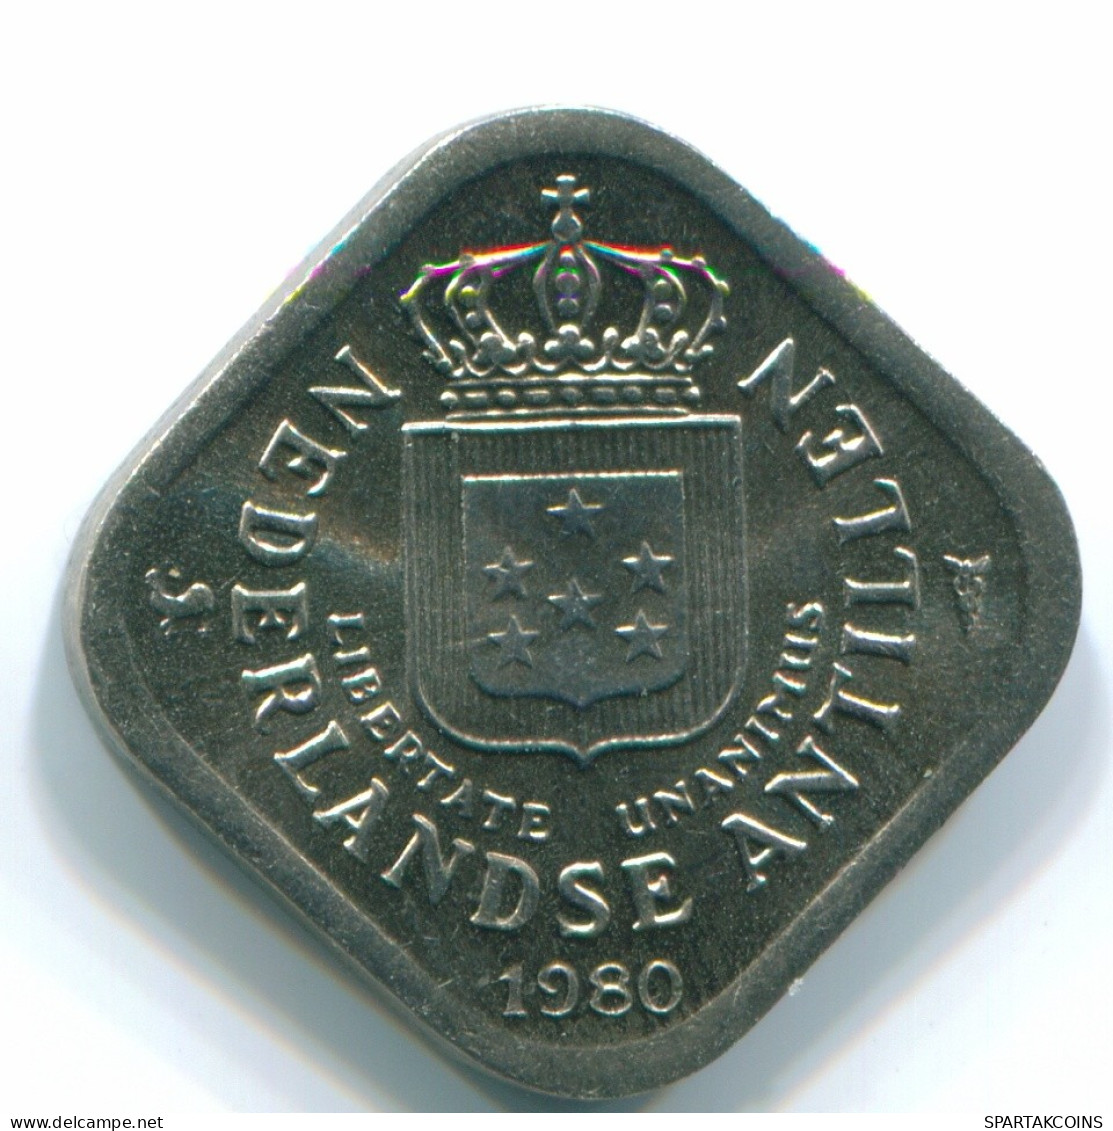 5 CENTS 1980 NETHERLANDS ANTILLES Nickel Colonial Coin #S12316.U.A - Netherlands Antilles